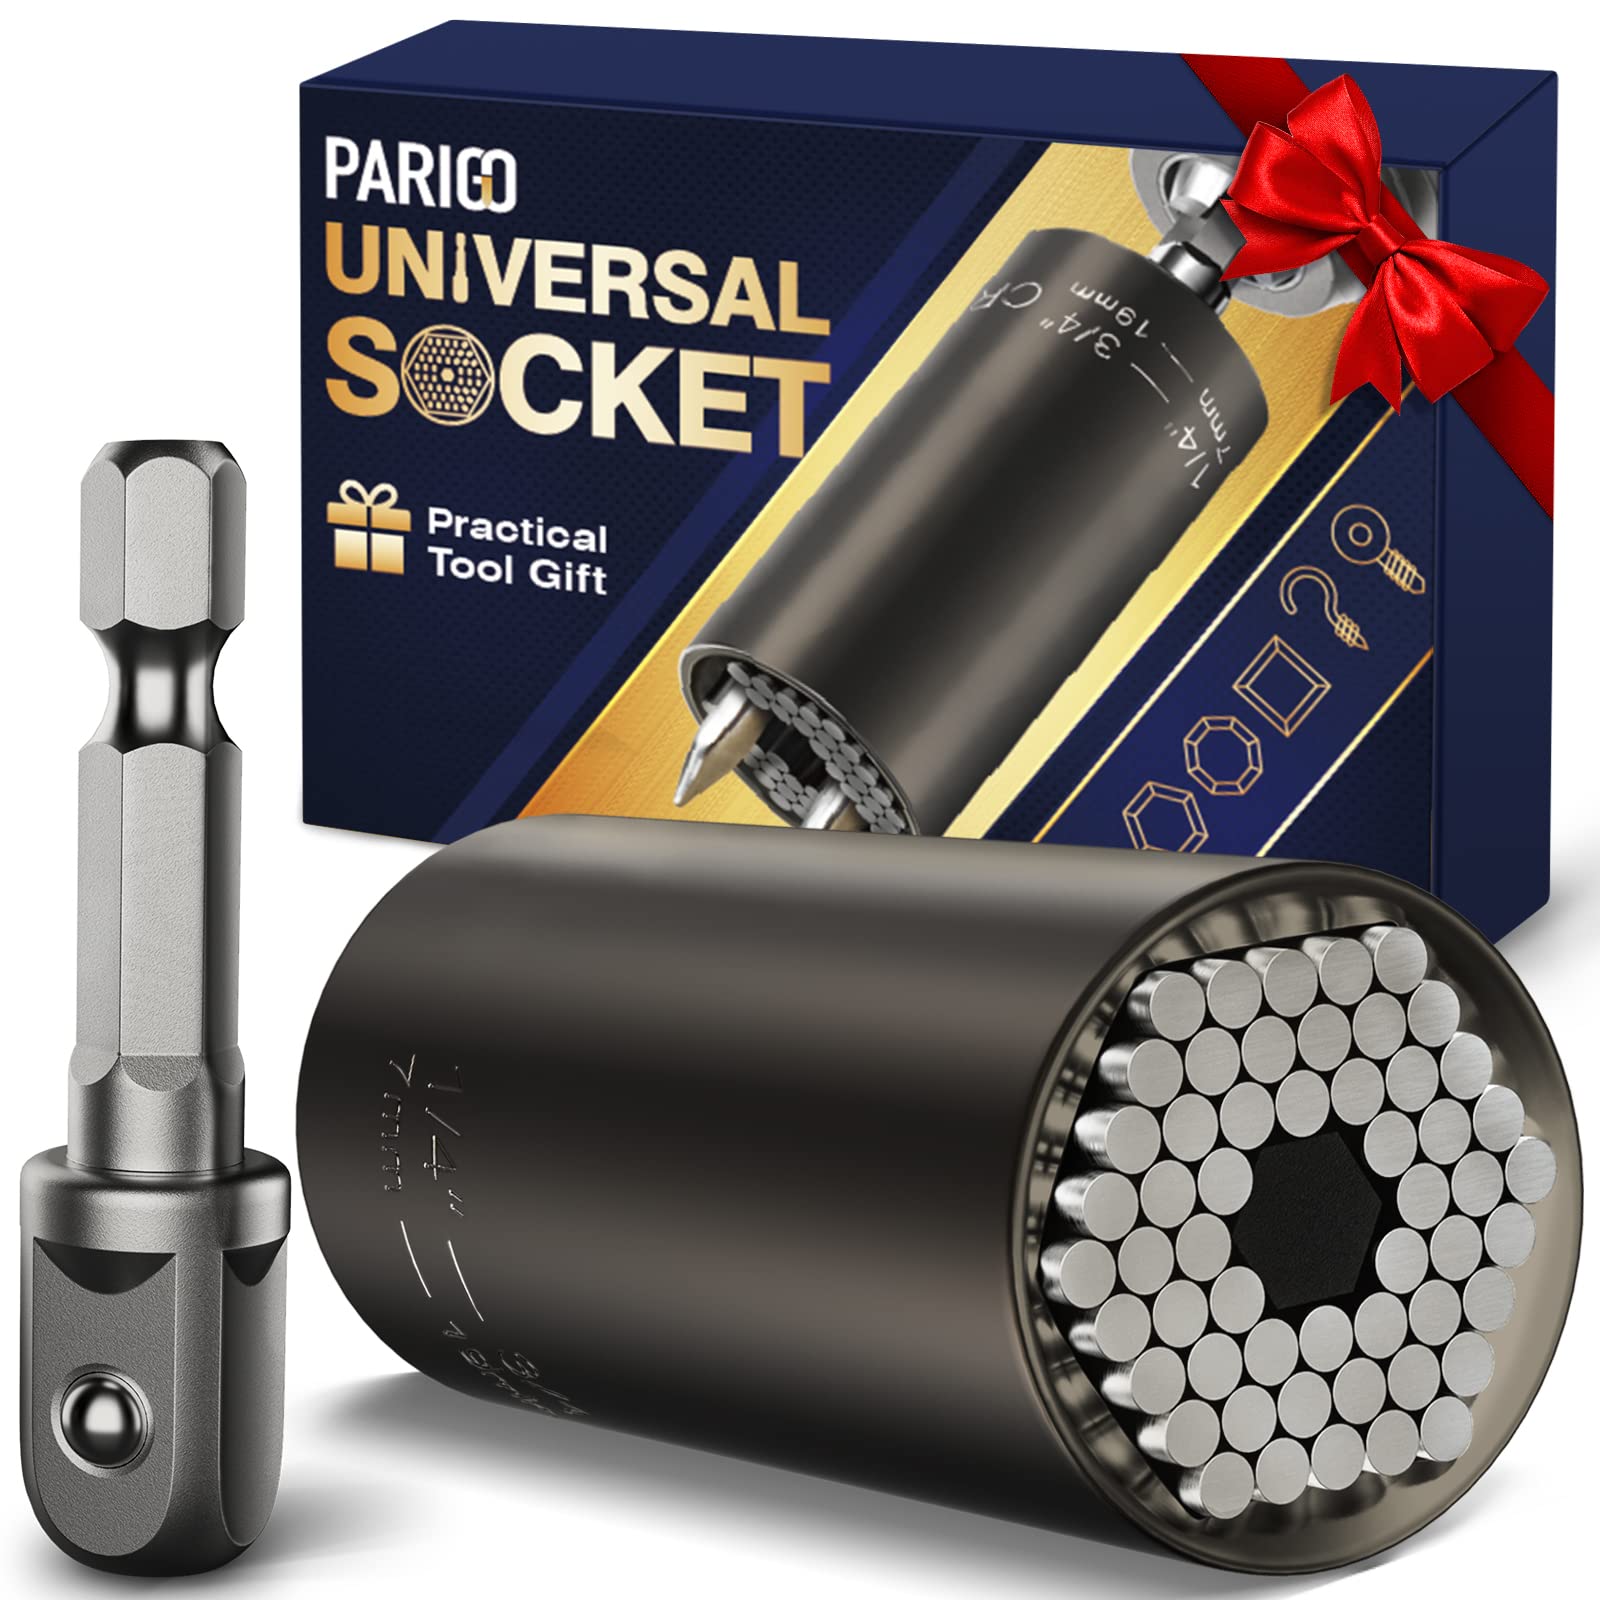 Father's Day Gifts for Dad from Daughter Son - Super Universal Socket Tools Gifts for Men, Socket Set with Power Drill Adapter Super Grip Socket (7-19mm) Cool Gadgets for Men Women Husband Handy DIY